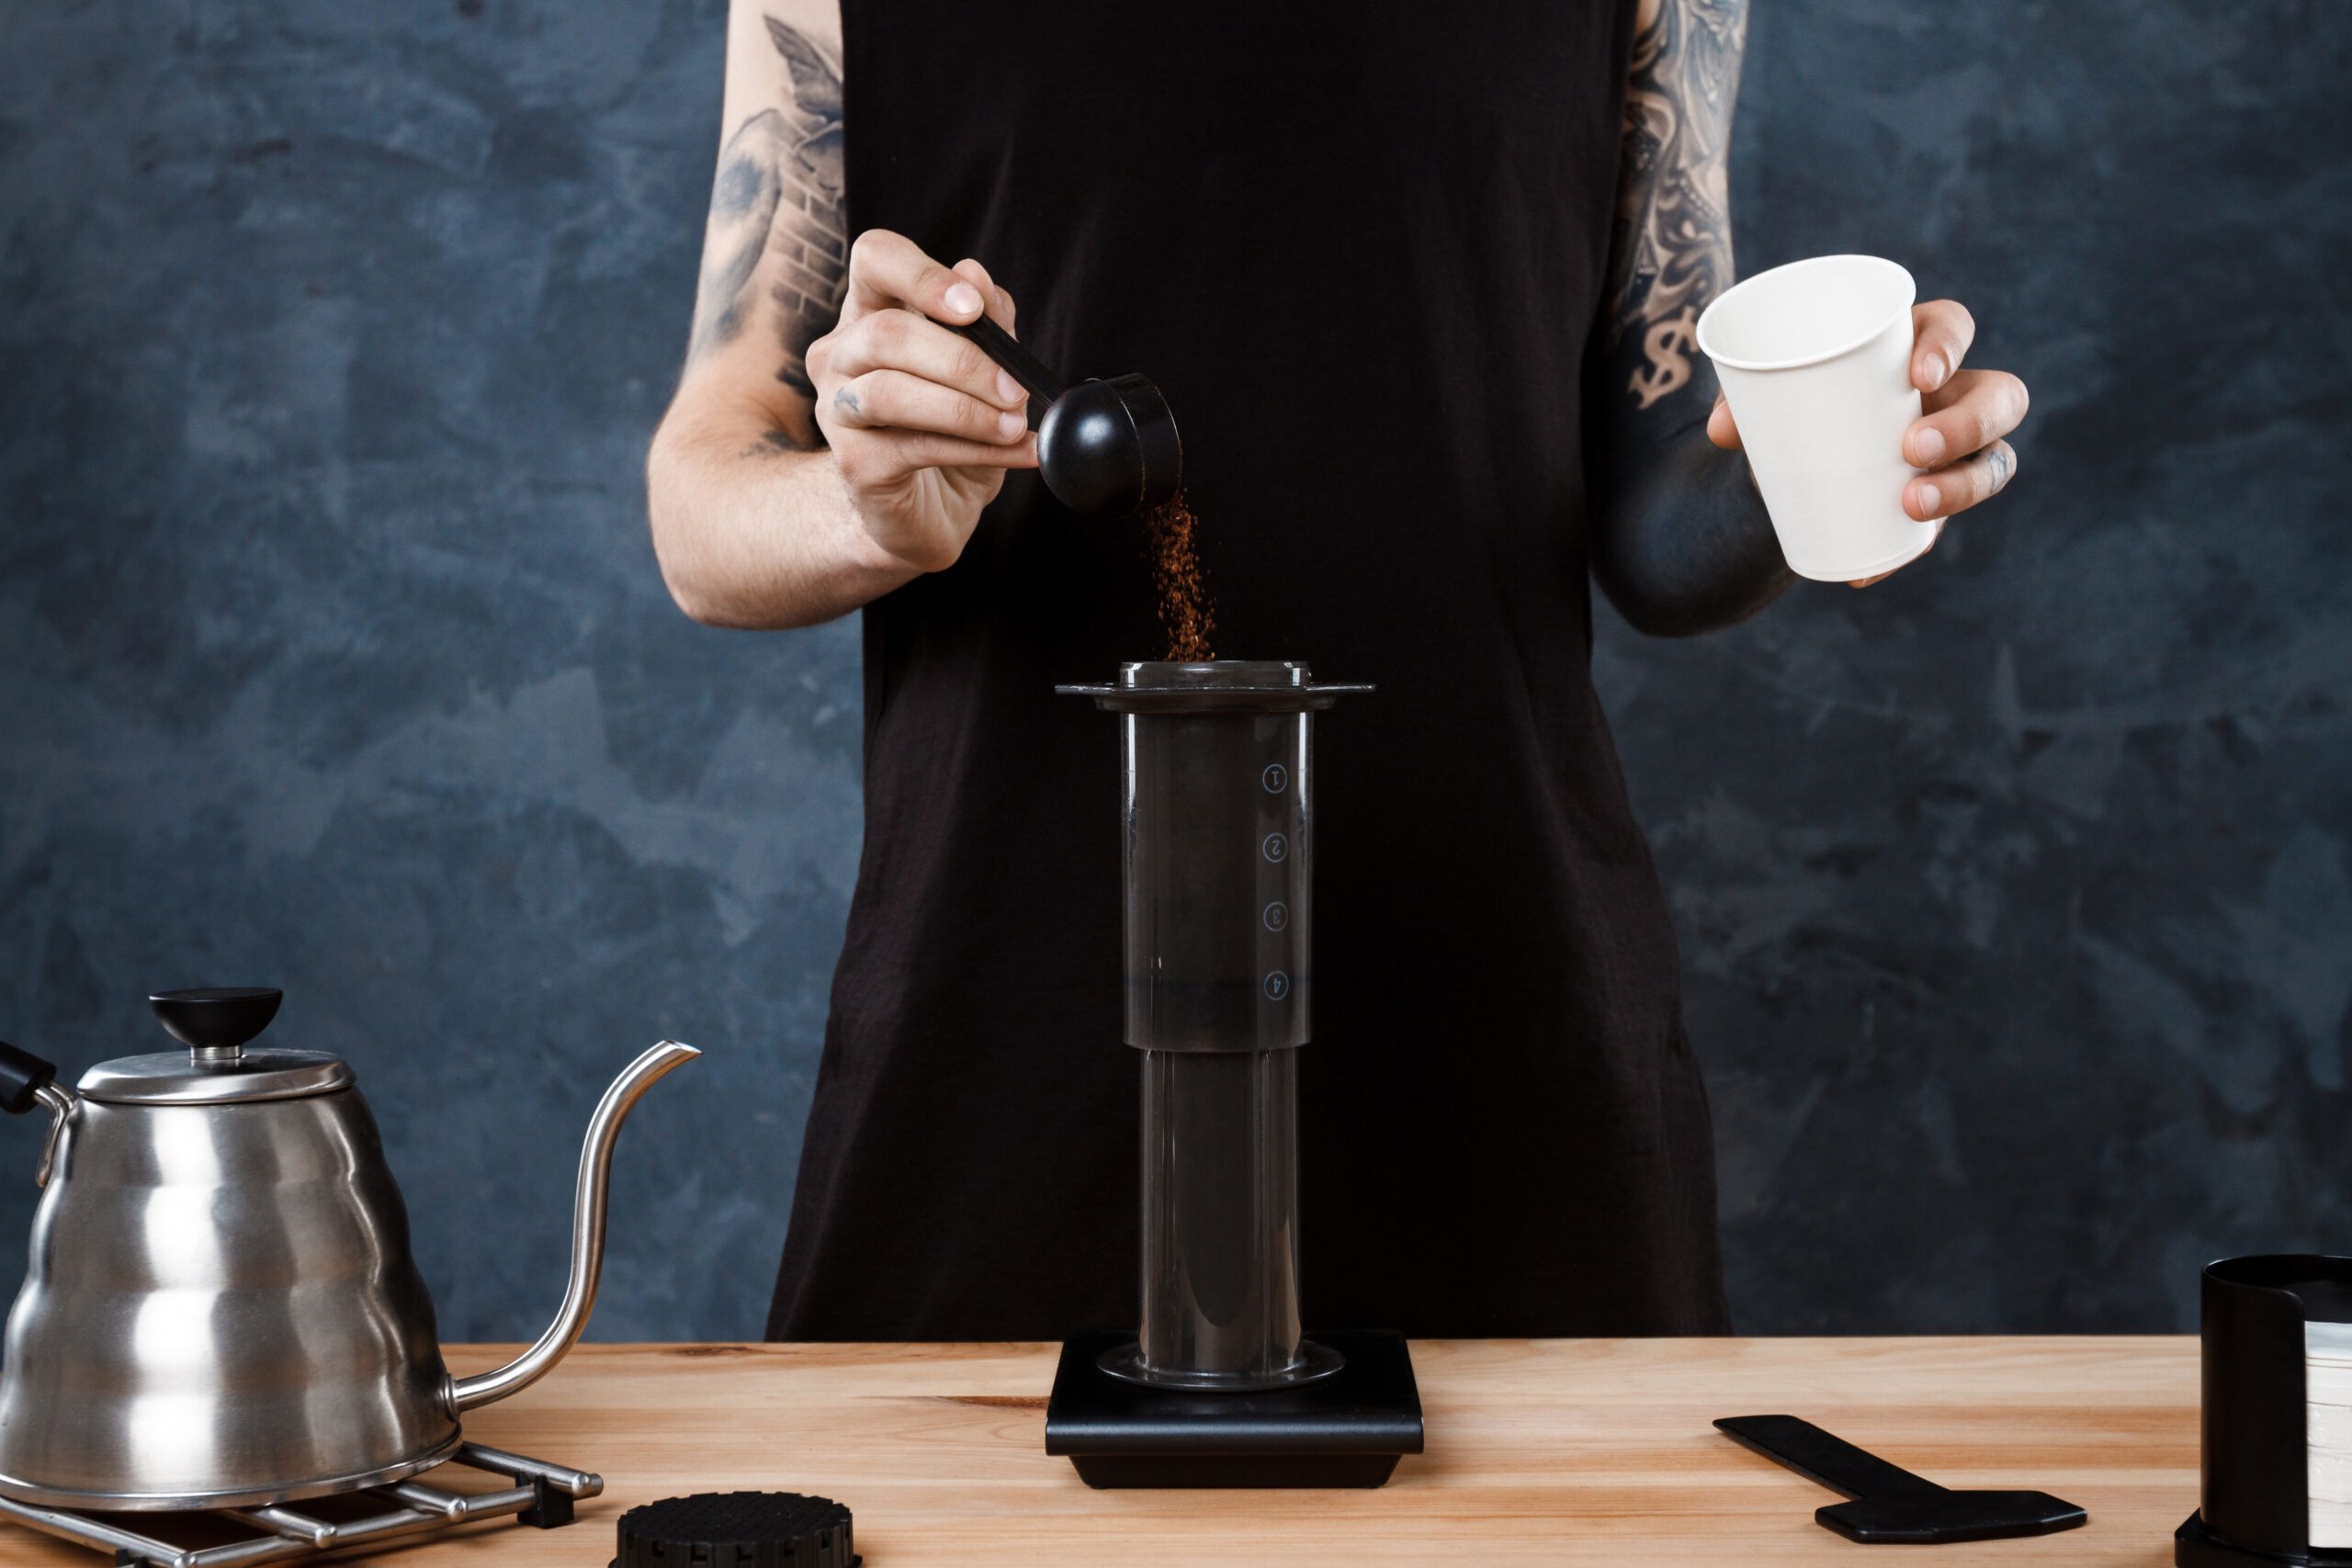 20 Reasons why Coffee Brewed Manually is Better